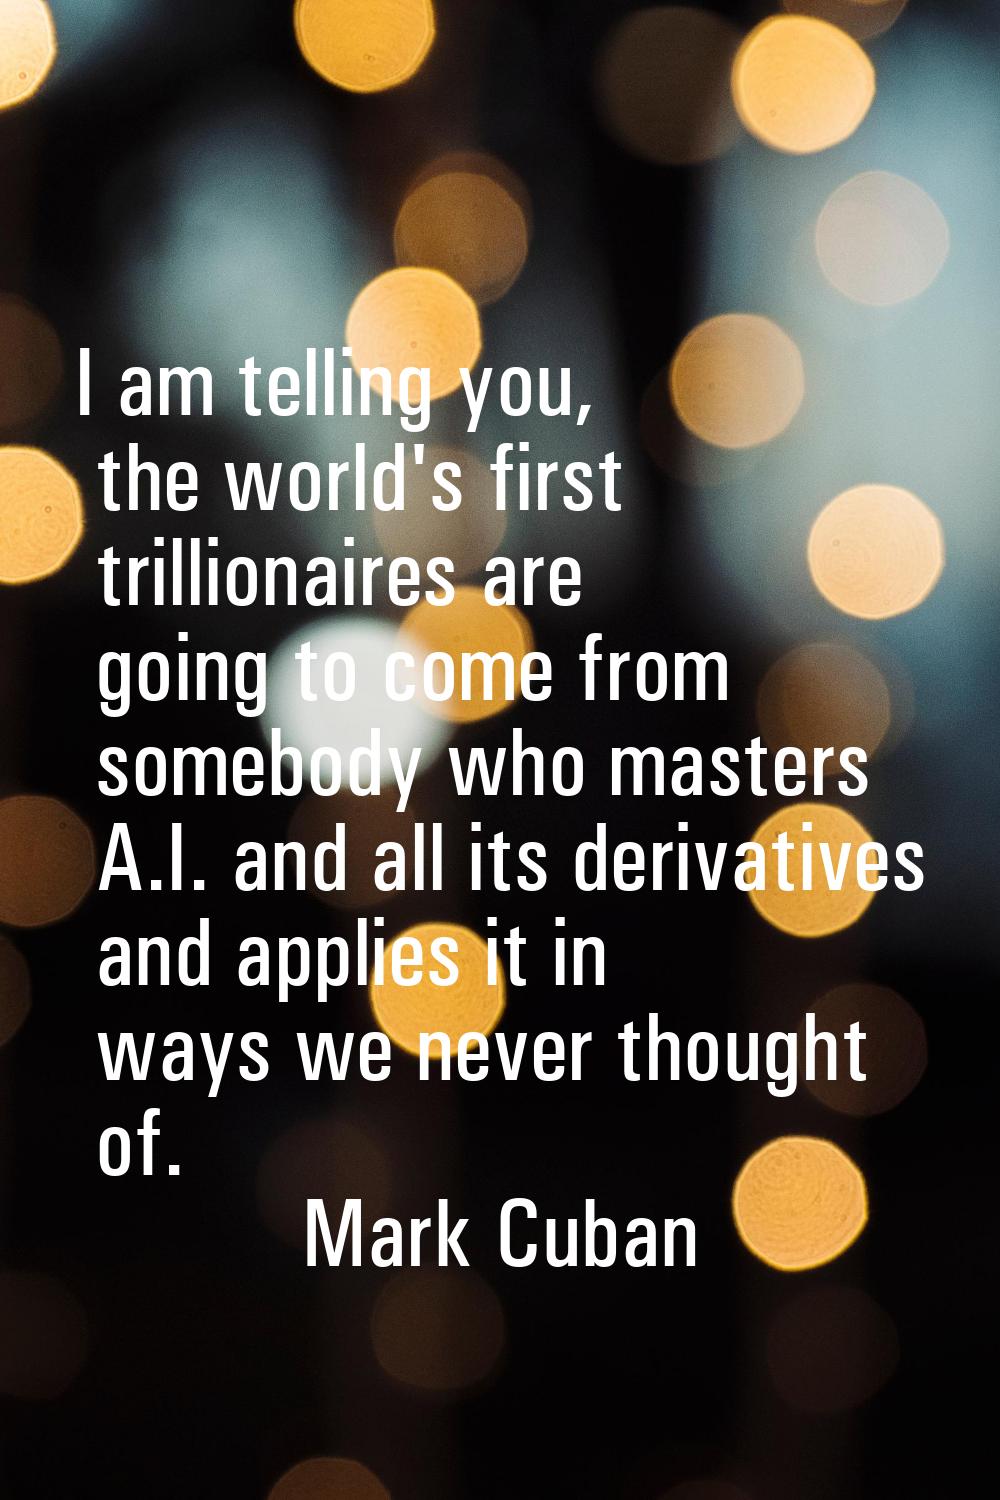 I am telling you, the world's first trillionaires are going to come from somebody who masters A.I. 